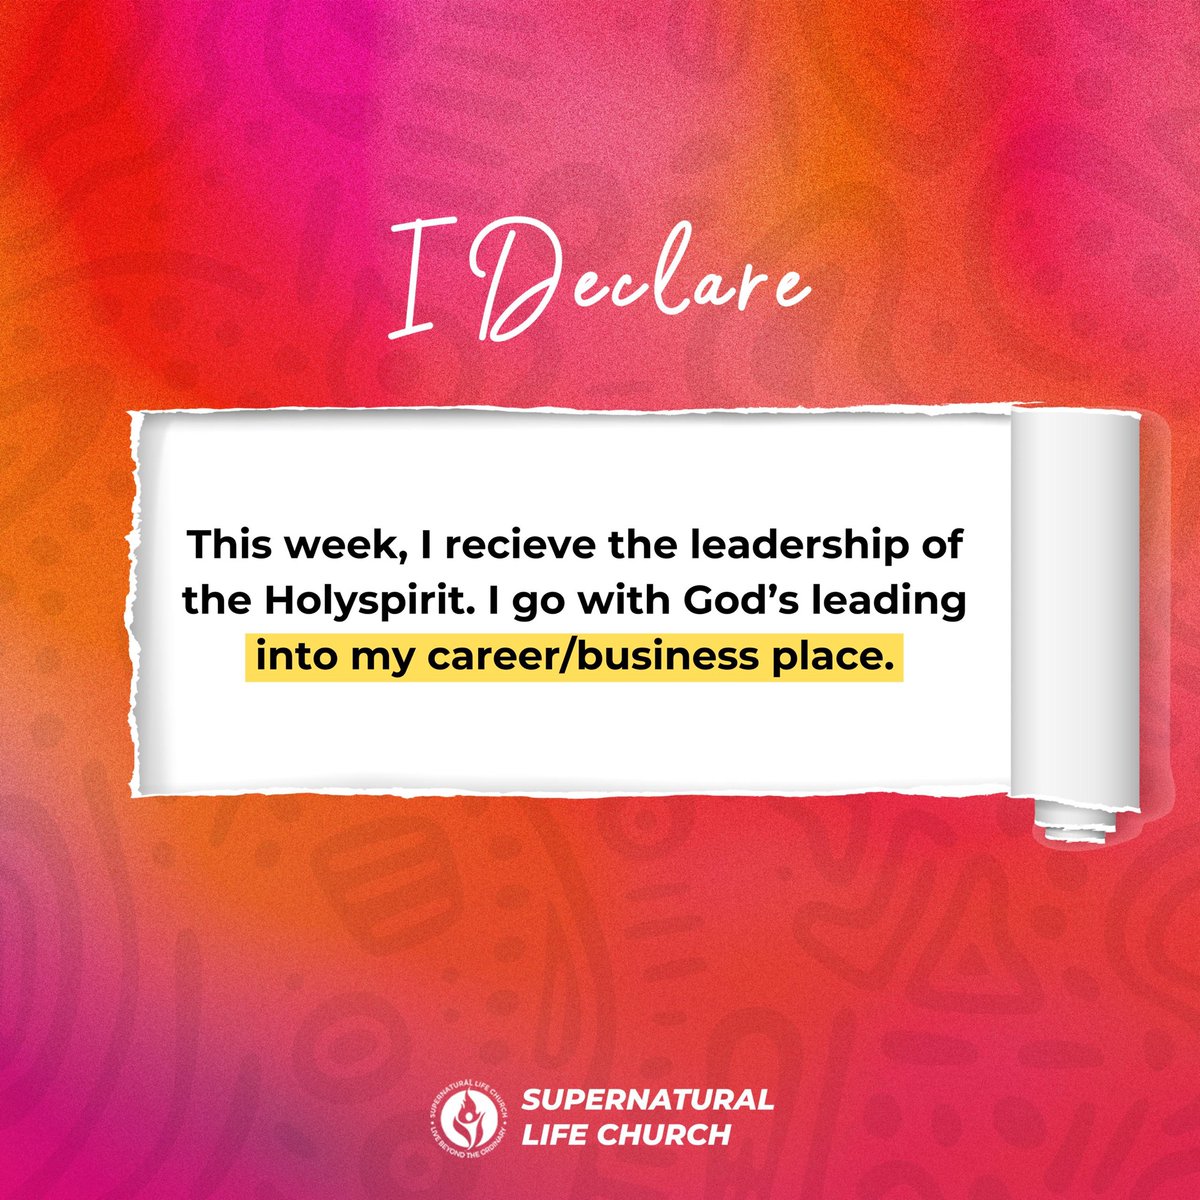 Your mouth is a powerful tool. Declare this  over your week and tag a friend to do the same in the comment section

#dailydeclaration
#ouryearofdominion
#theslcexperience 
#slcfamilyworldwide